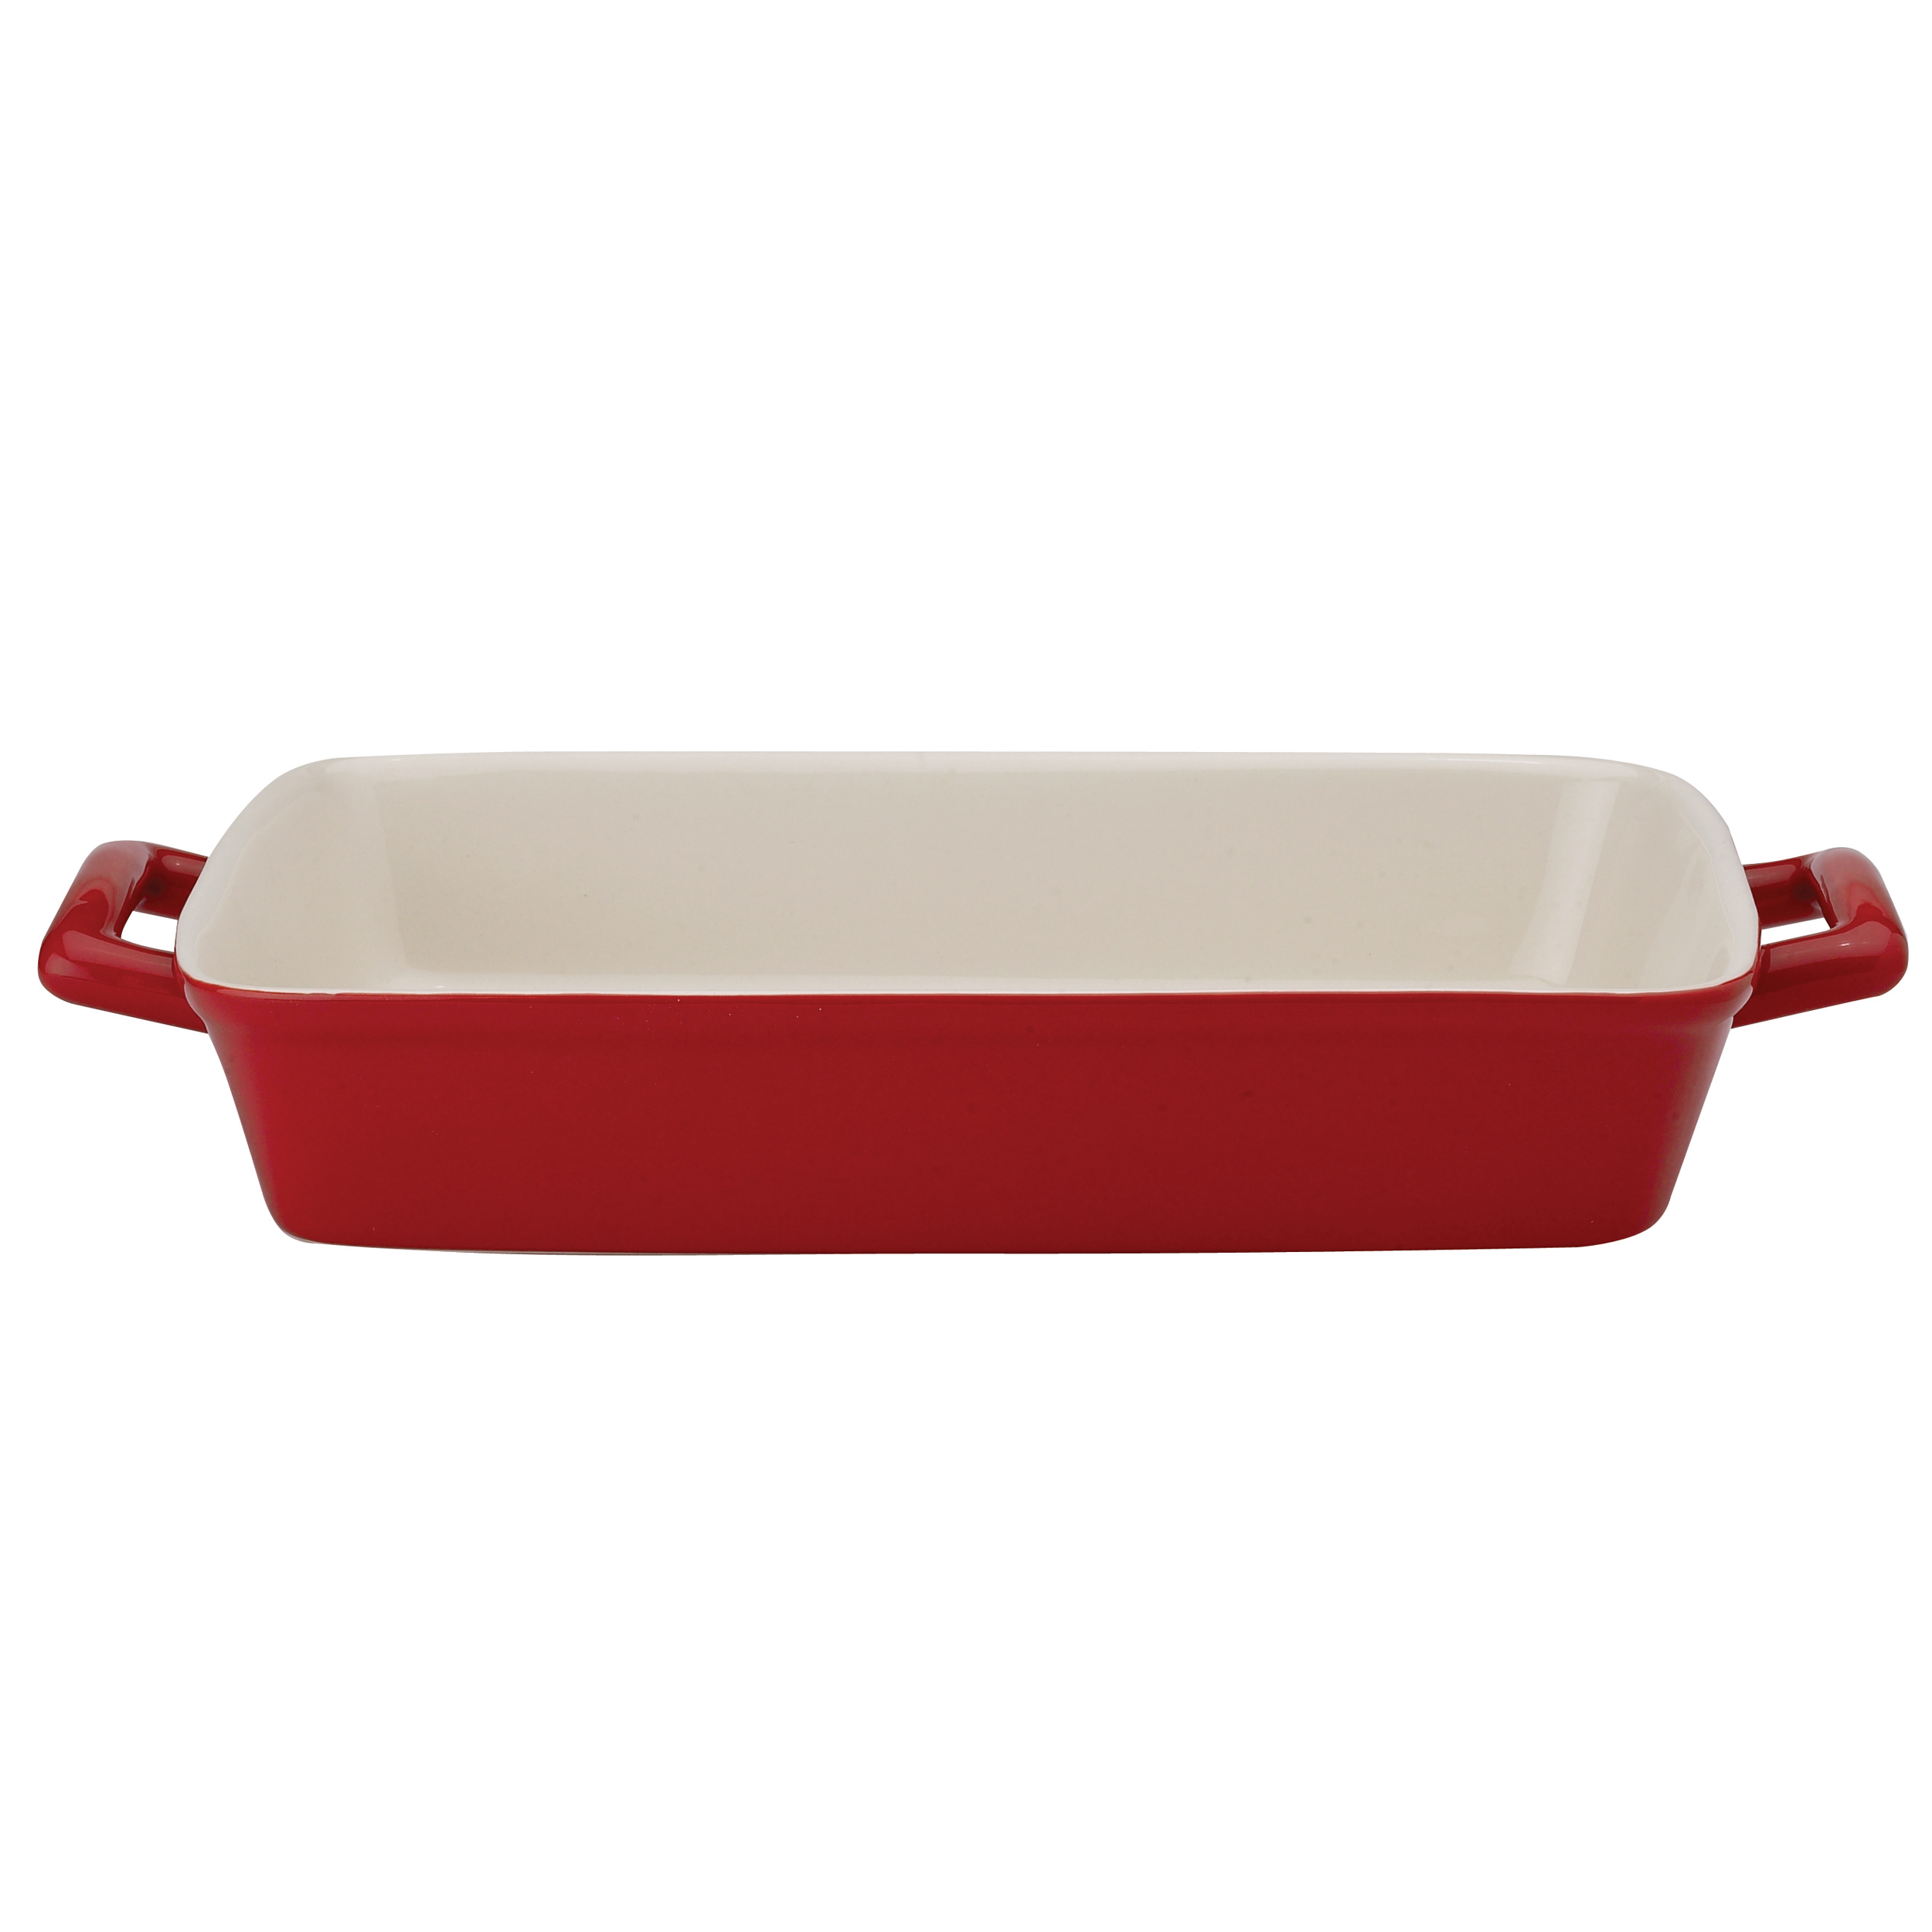 https://kitchenkneads.com/wp-content/uploads/2020/10/HIC-Lasagna-Pan-with-Handle-Rose-98048RS.png